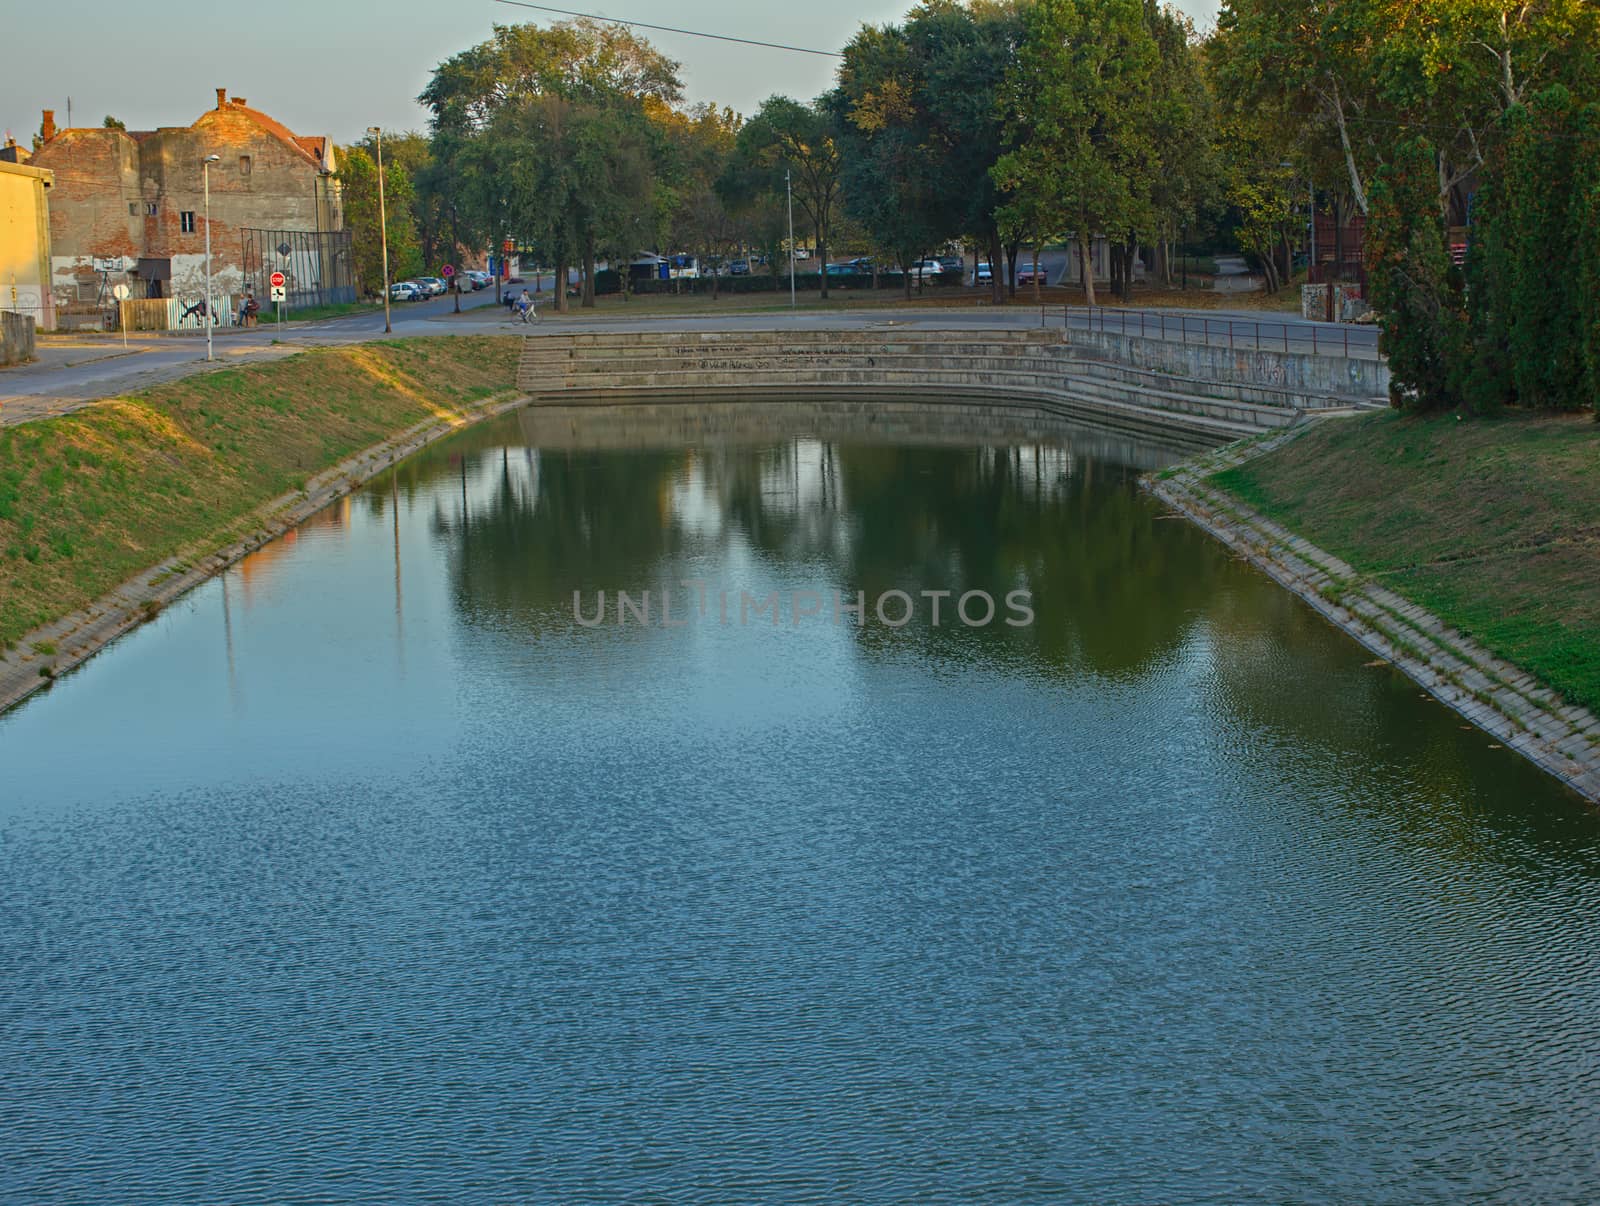 ZRENJANIN, SERBIA, OCTOBER 14th 2018 - River bank with a concrete dock by sheriffkule